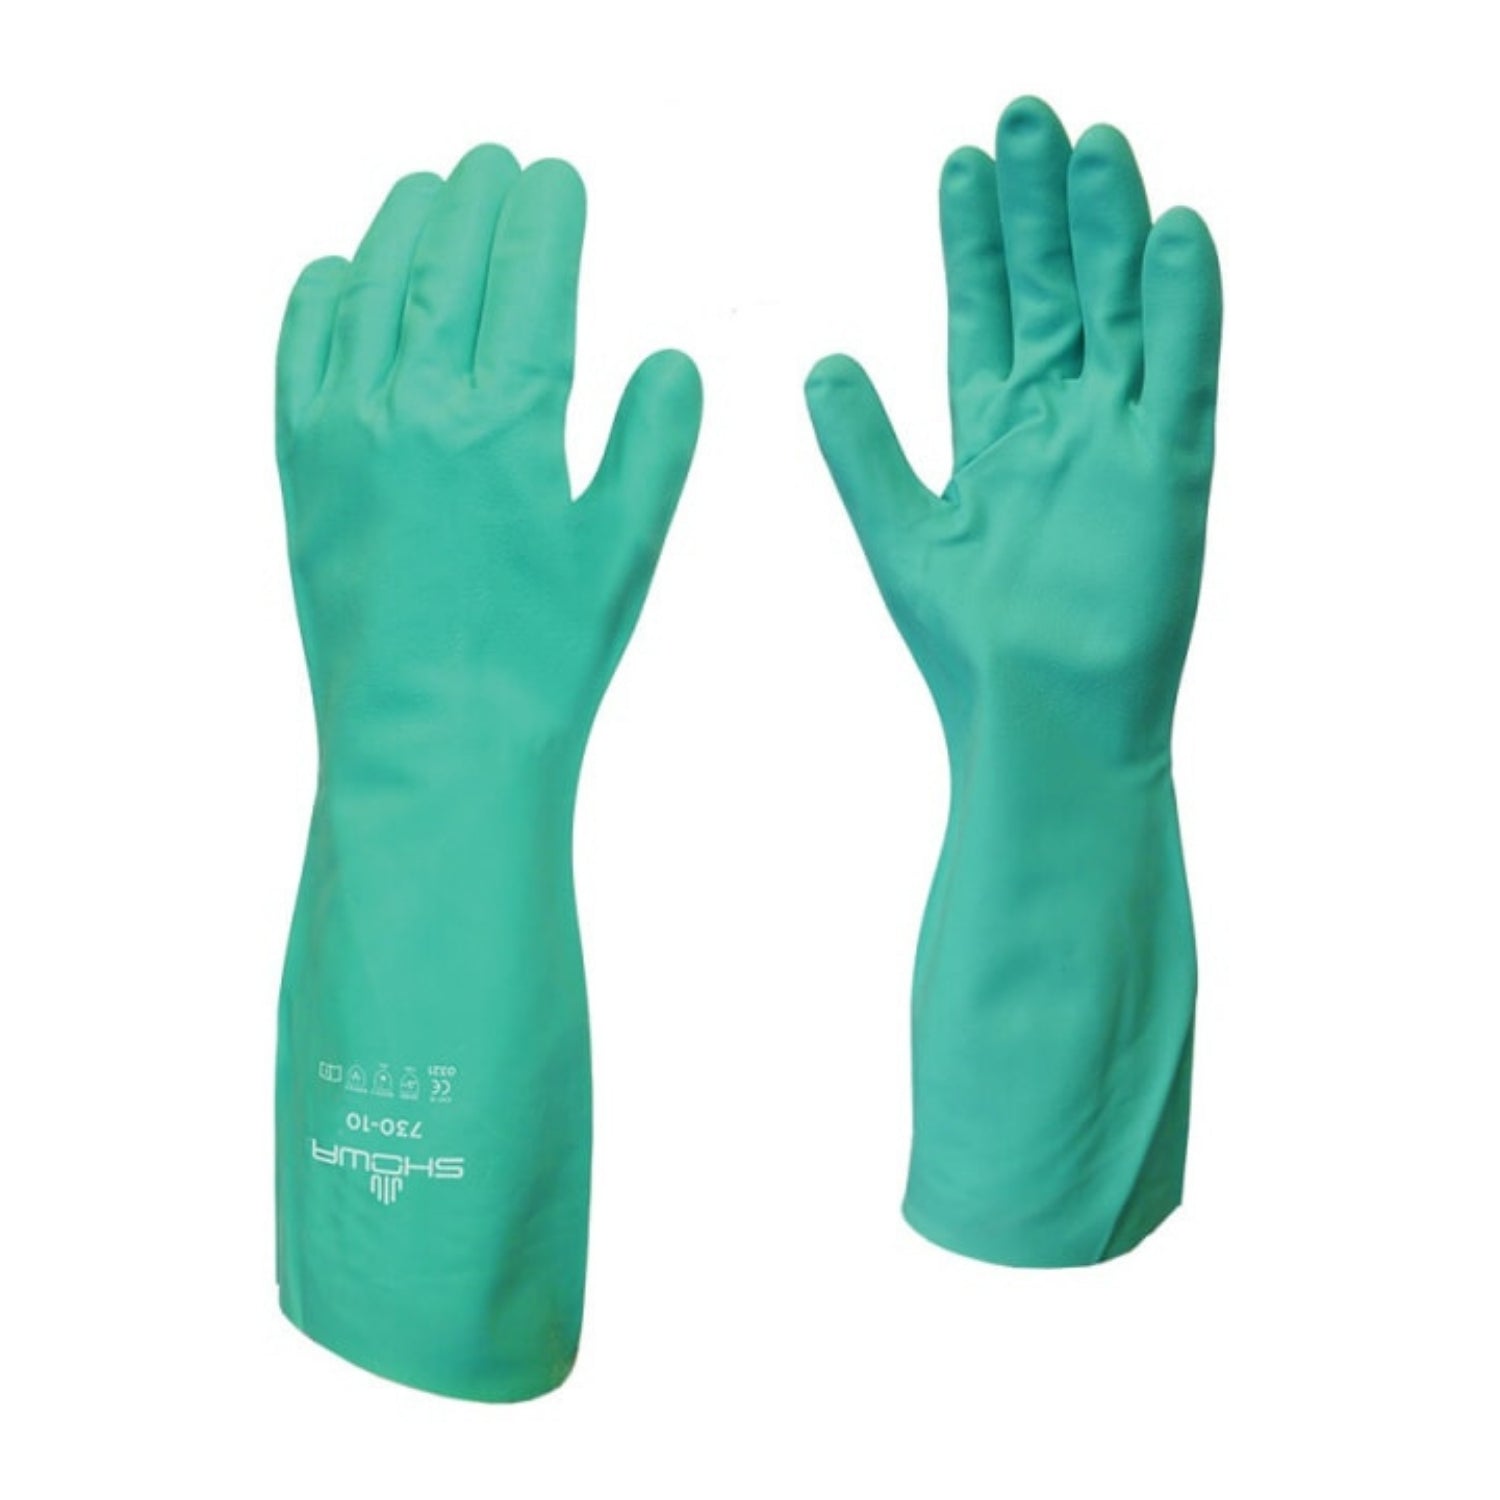 SHOWA 730 - Chemical Protection Gloves